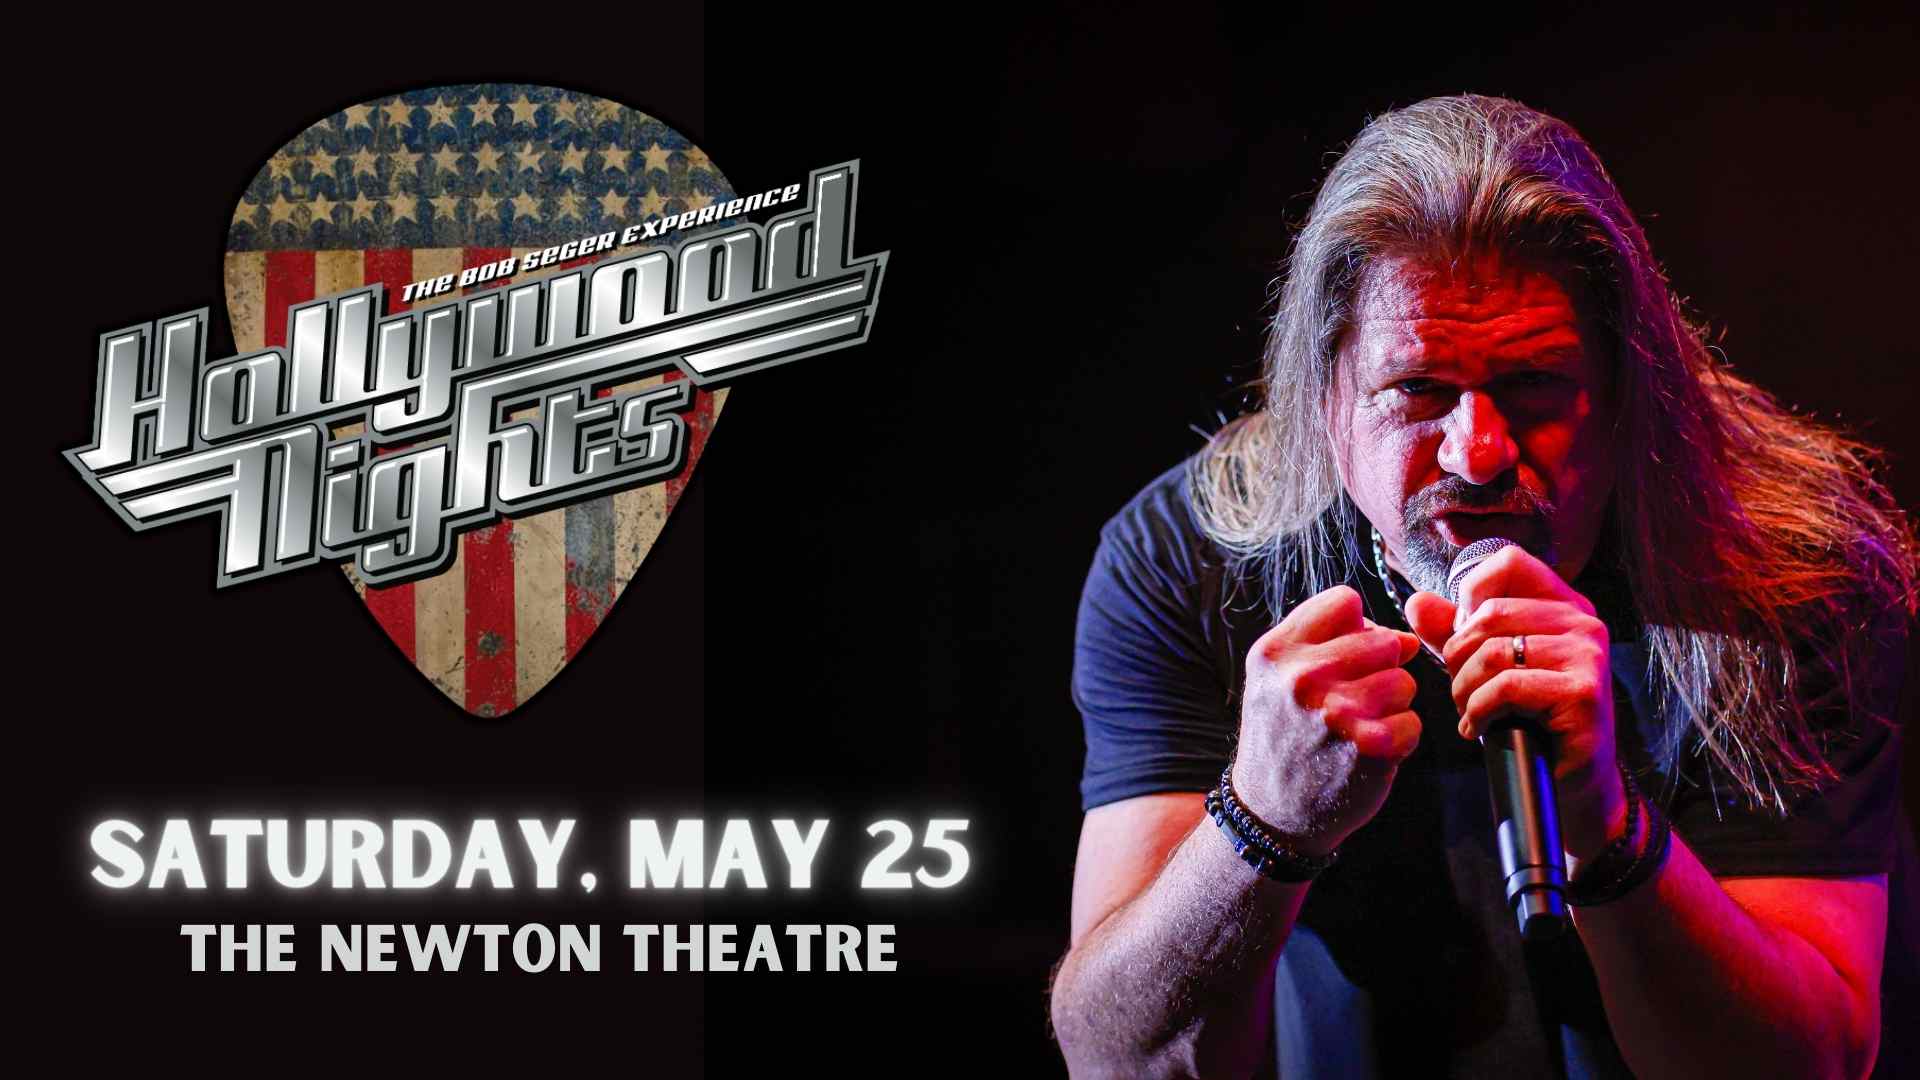 Hollywood Nights - A Bob Seger Experience playing The Newton Theatre on Saturday, May 25th